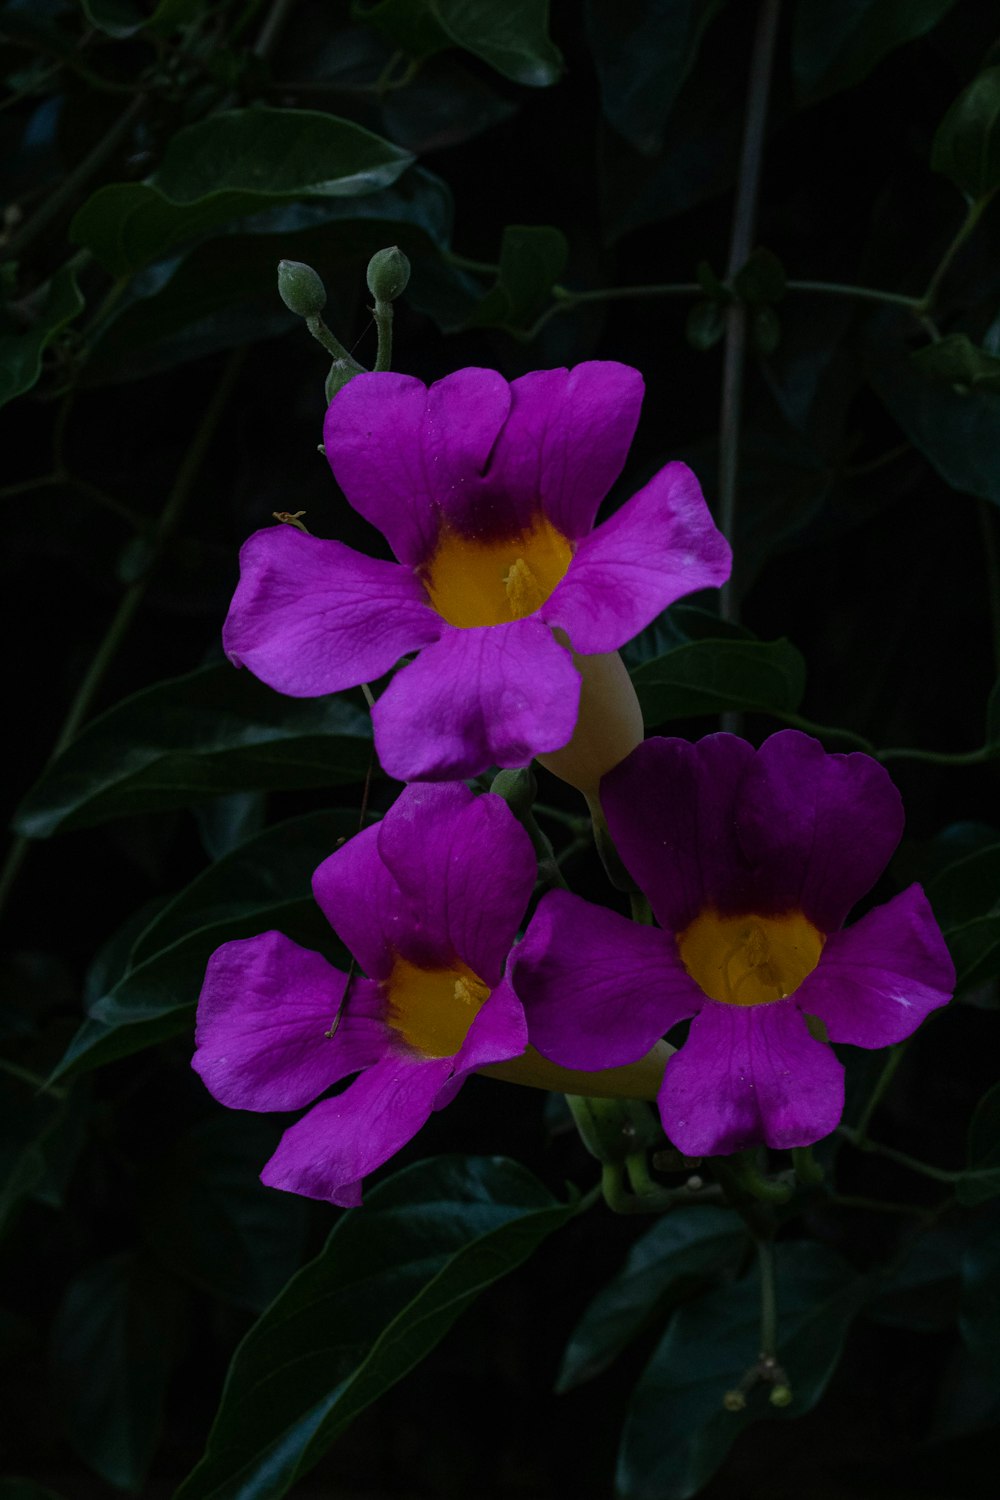 a group of purple flowers with yellow centers